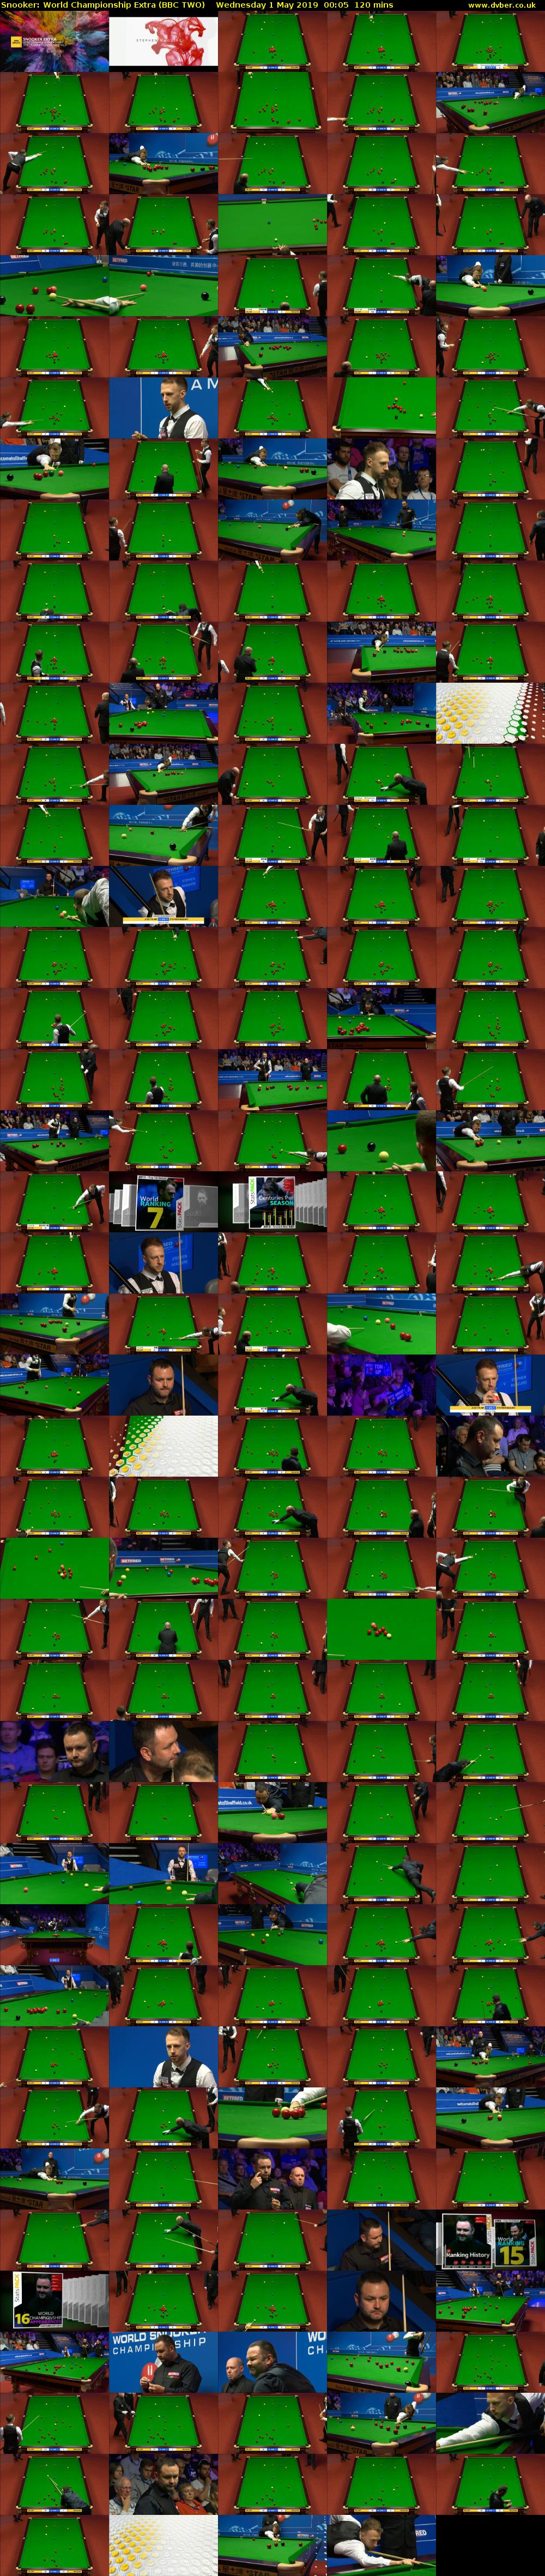 Snooker: World Championship Extra (BBC TWO) Wednesday 1 May 2019 00:05 - 02:05